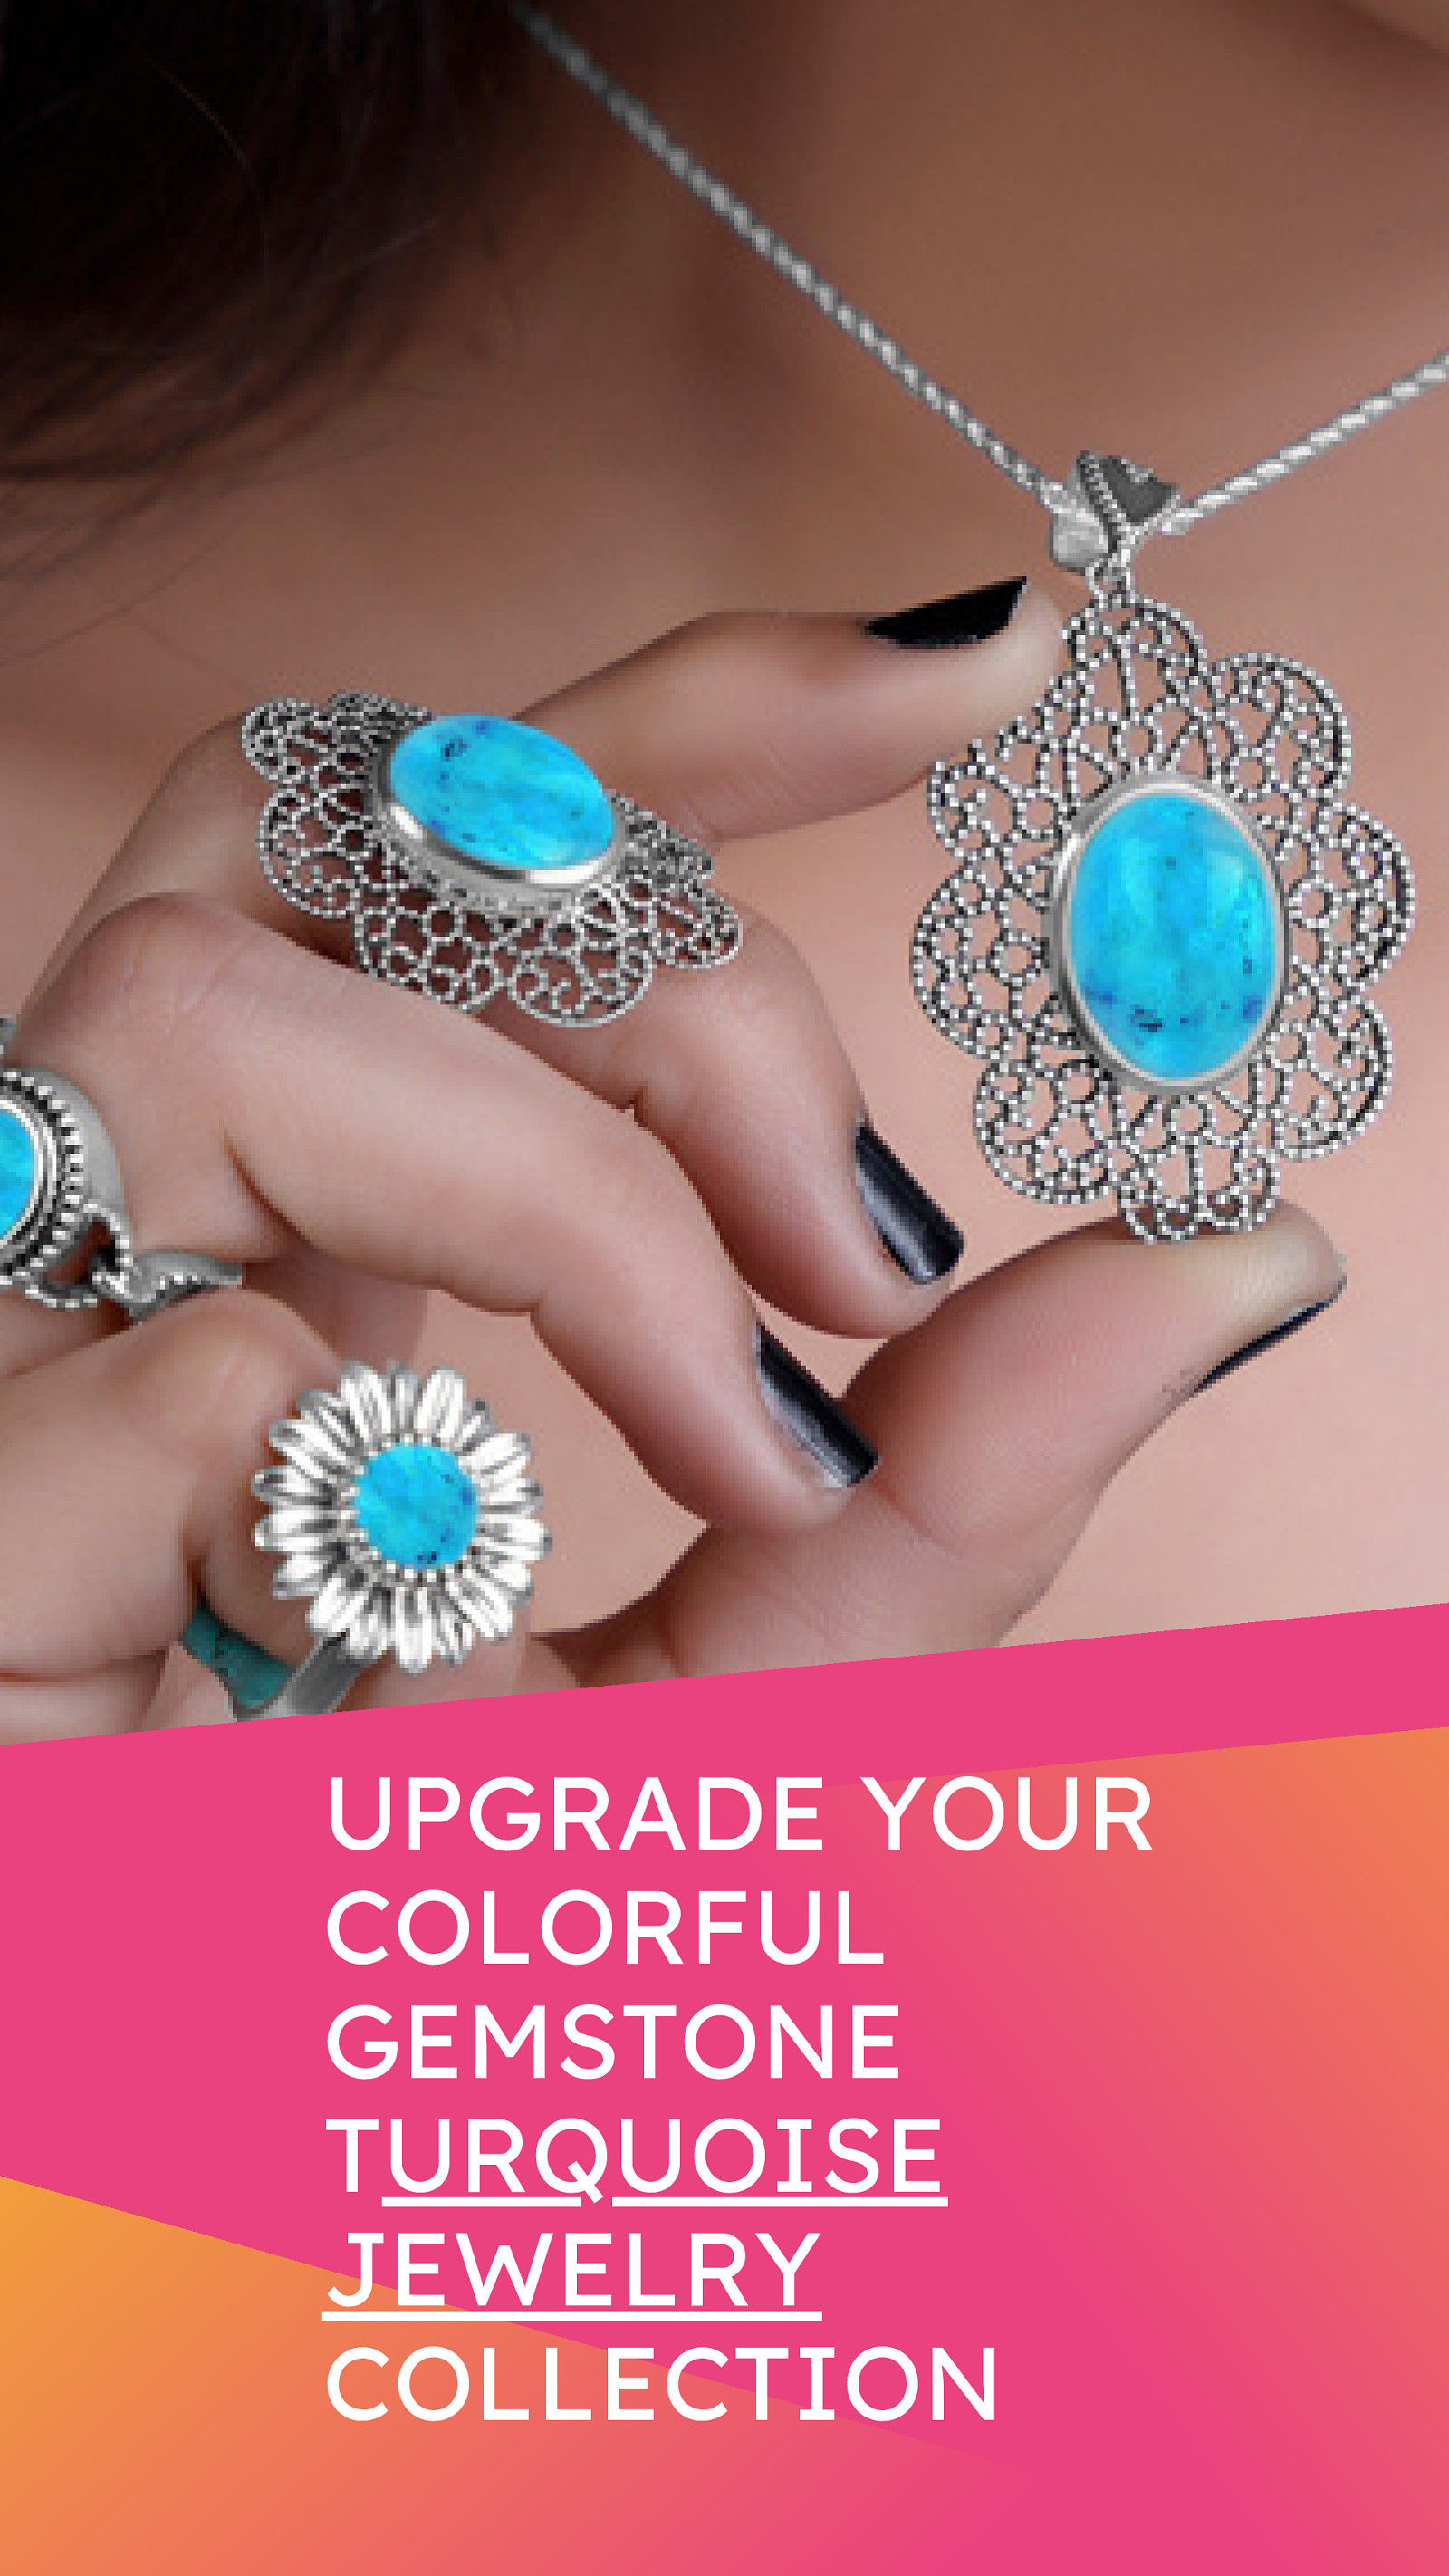 Buy Amazing Turquoise Jewelry Collection At Wholesale Price | Rananjay Exports